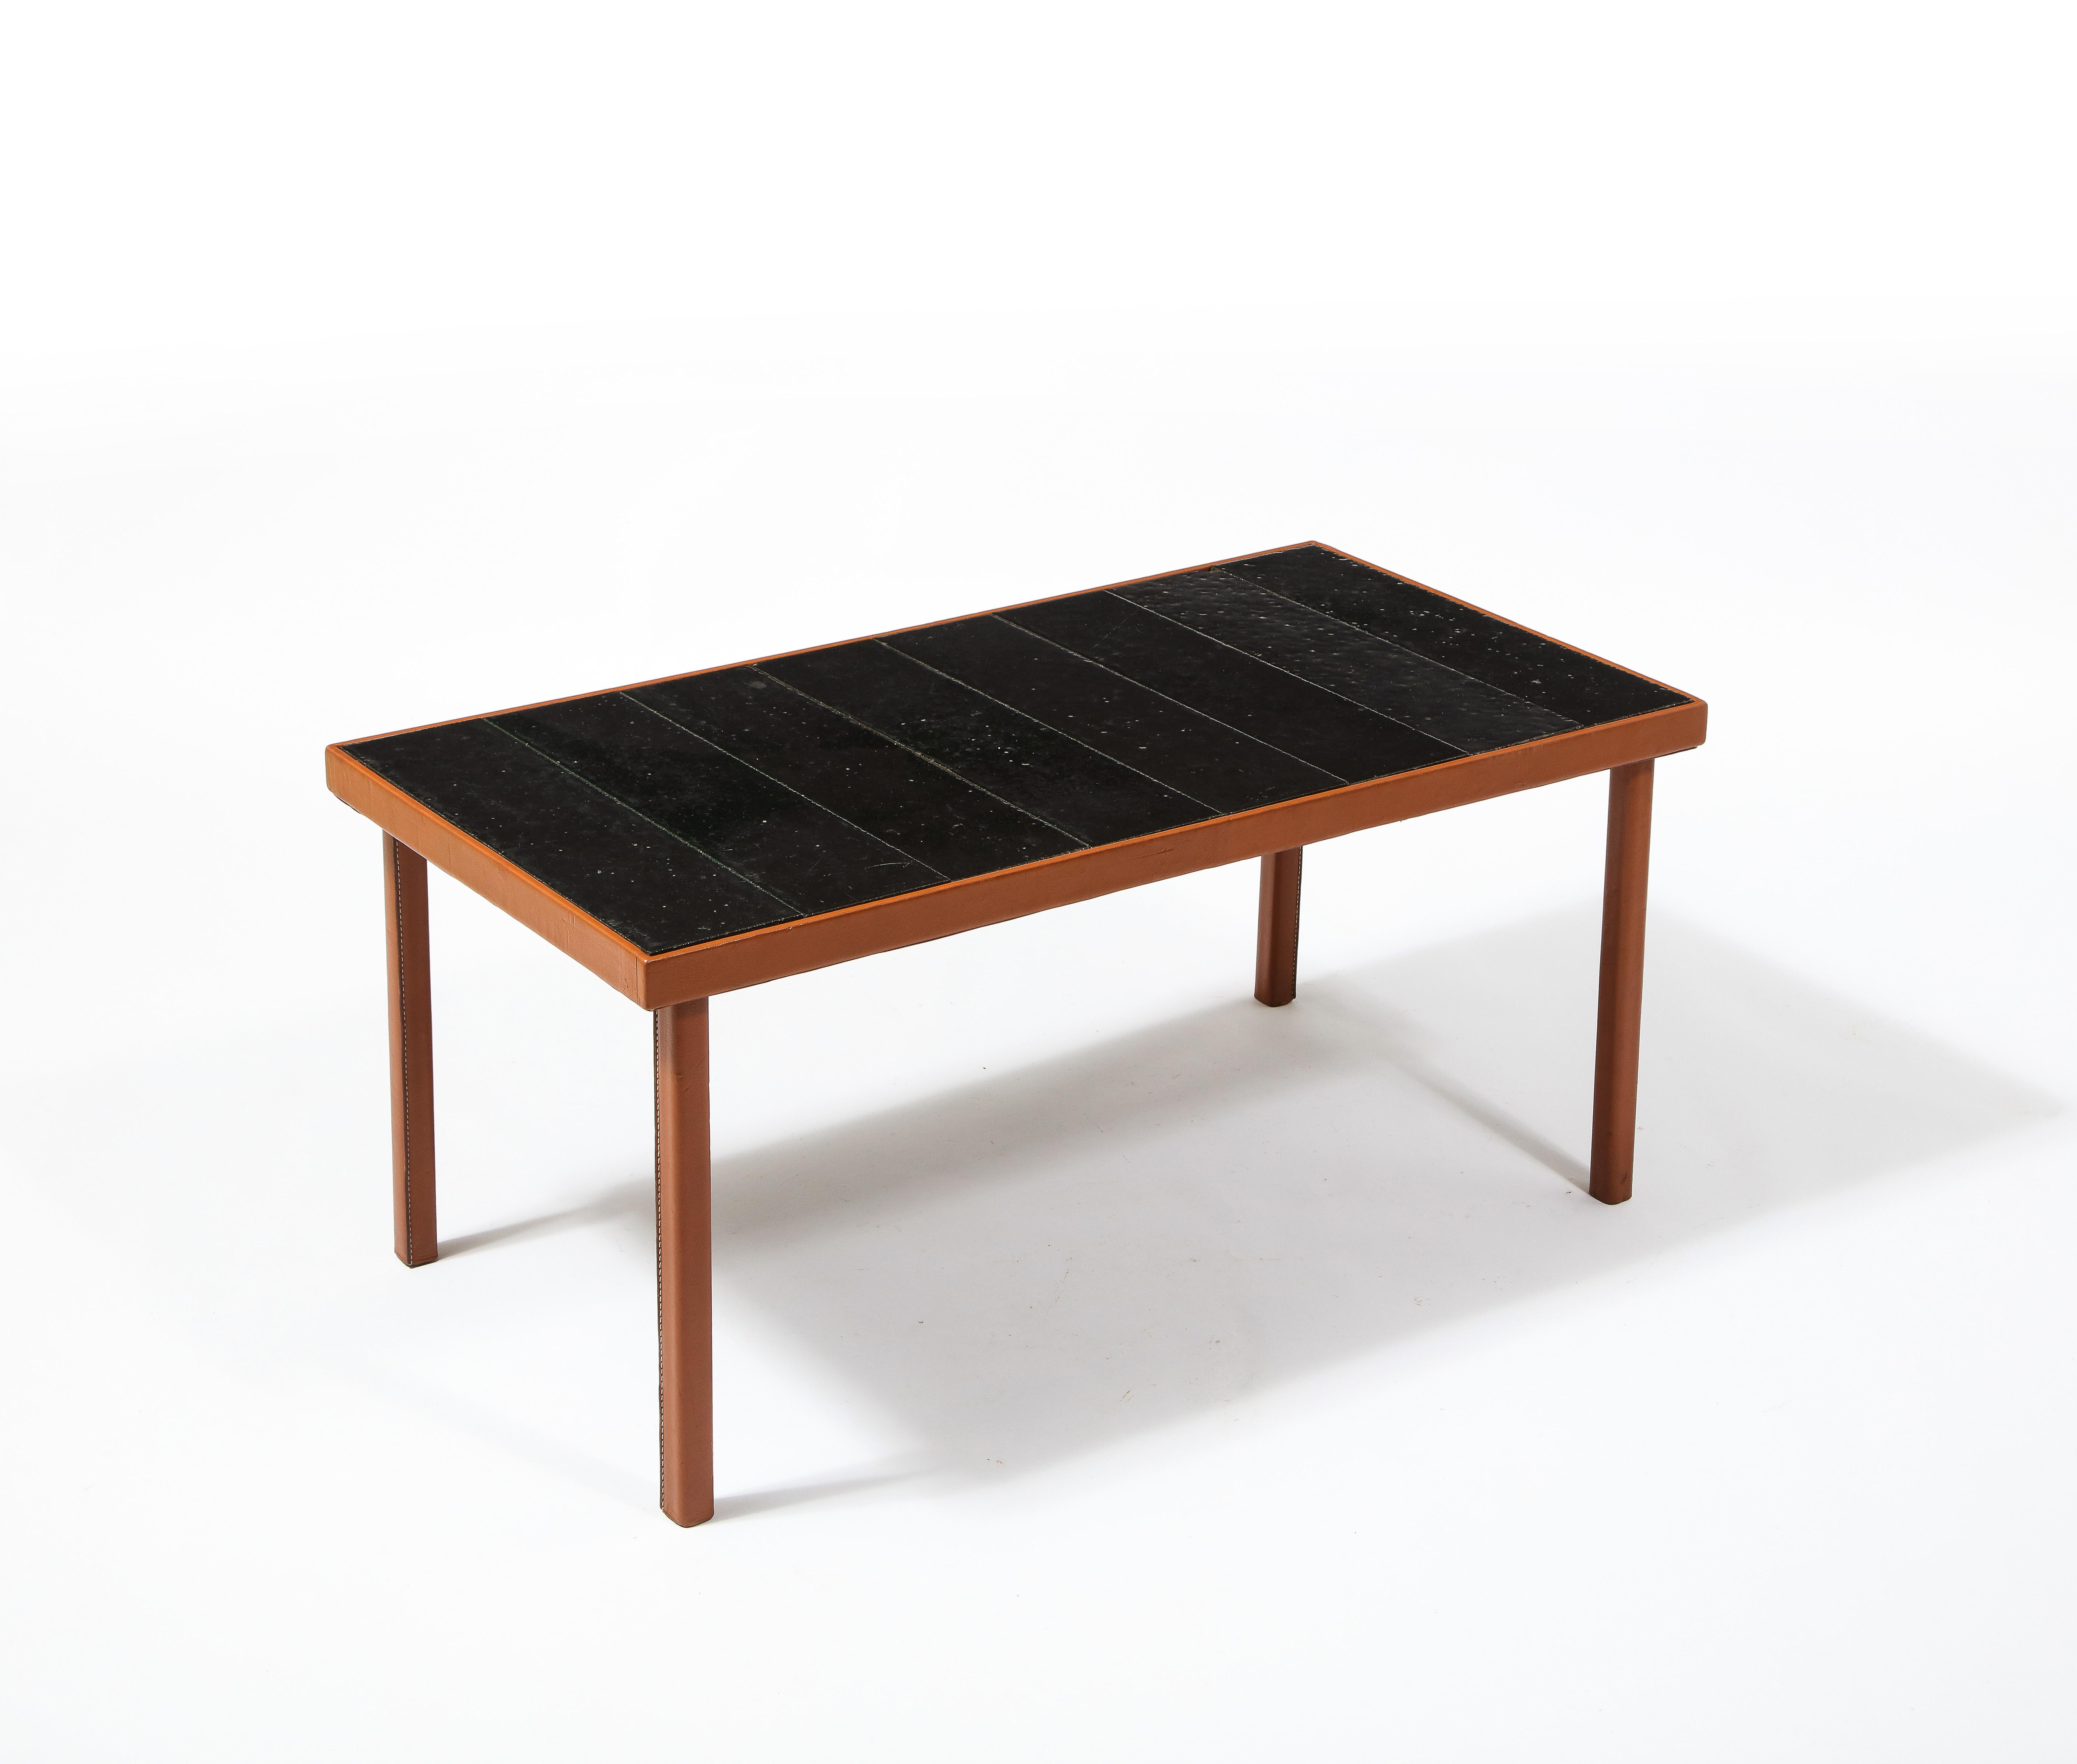 Steel Adnet Style Leather & Dark Jouve Style Lava Stone Tiles Table, France 1950's For Sale